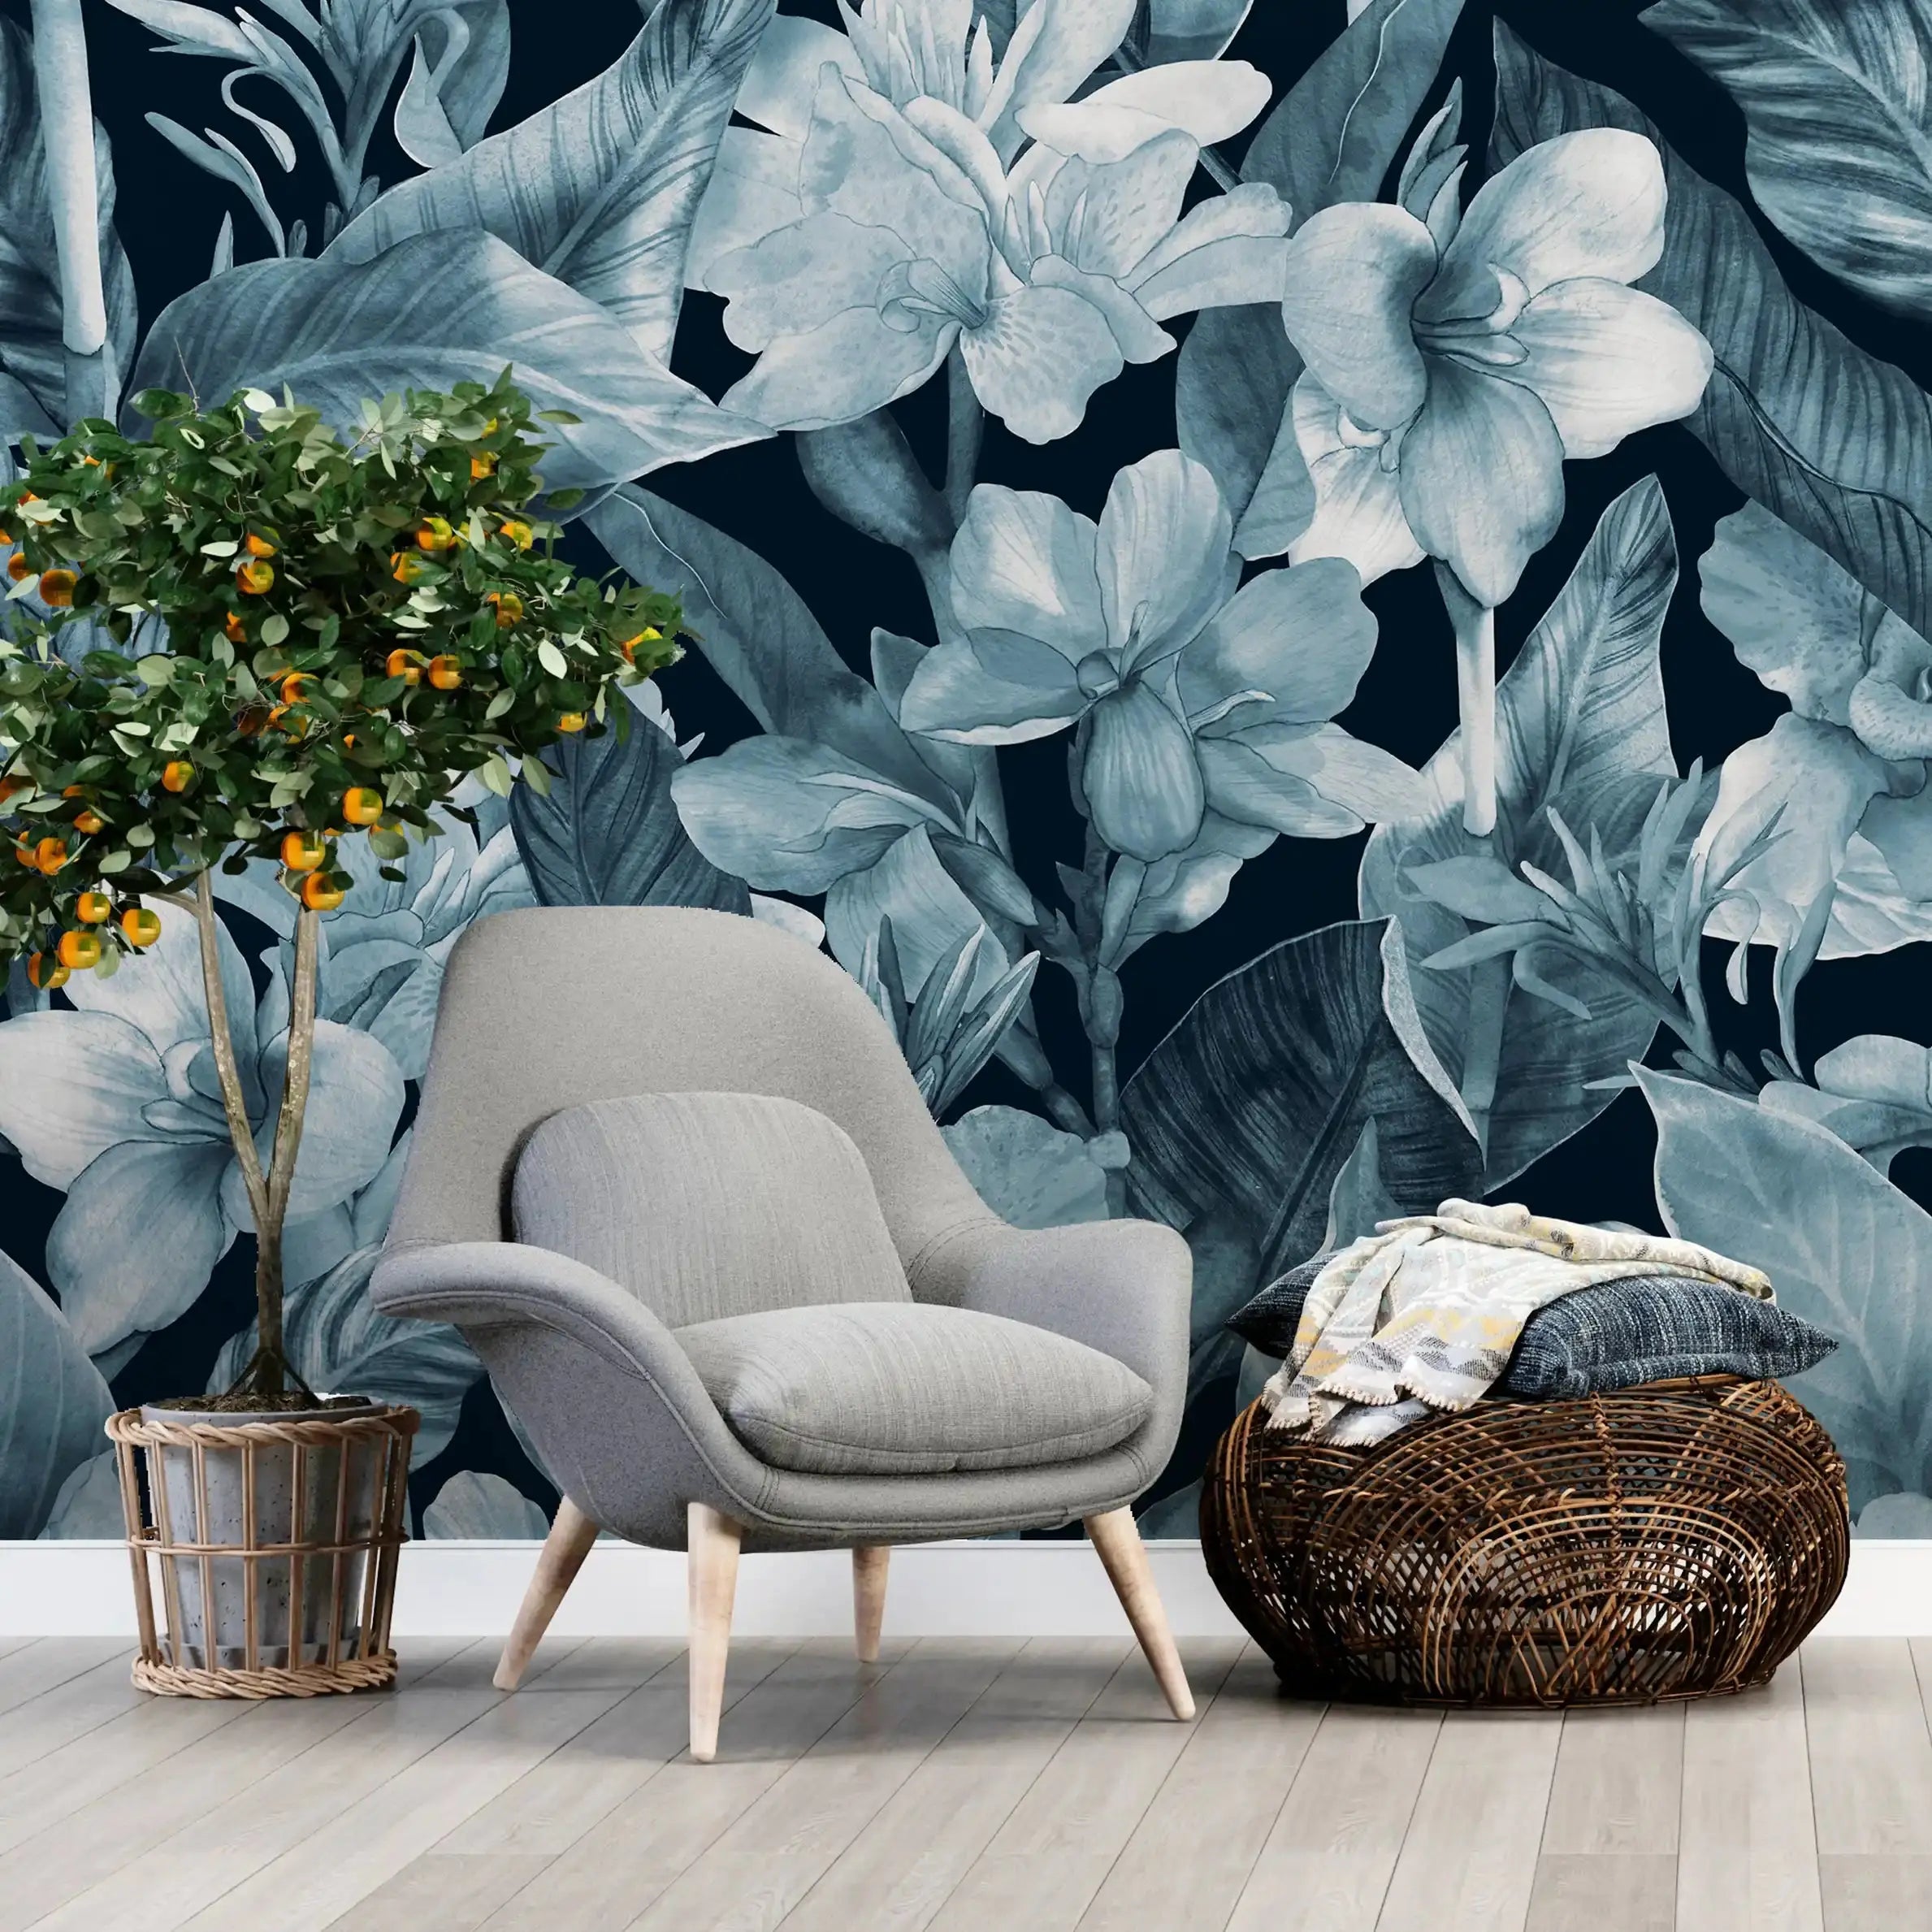 3074-B / Botanical Peel and Stick Wallpaper: Blue Floral & Black Leaf Pattern, Perfect for Accent Wall Decor - Artevella